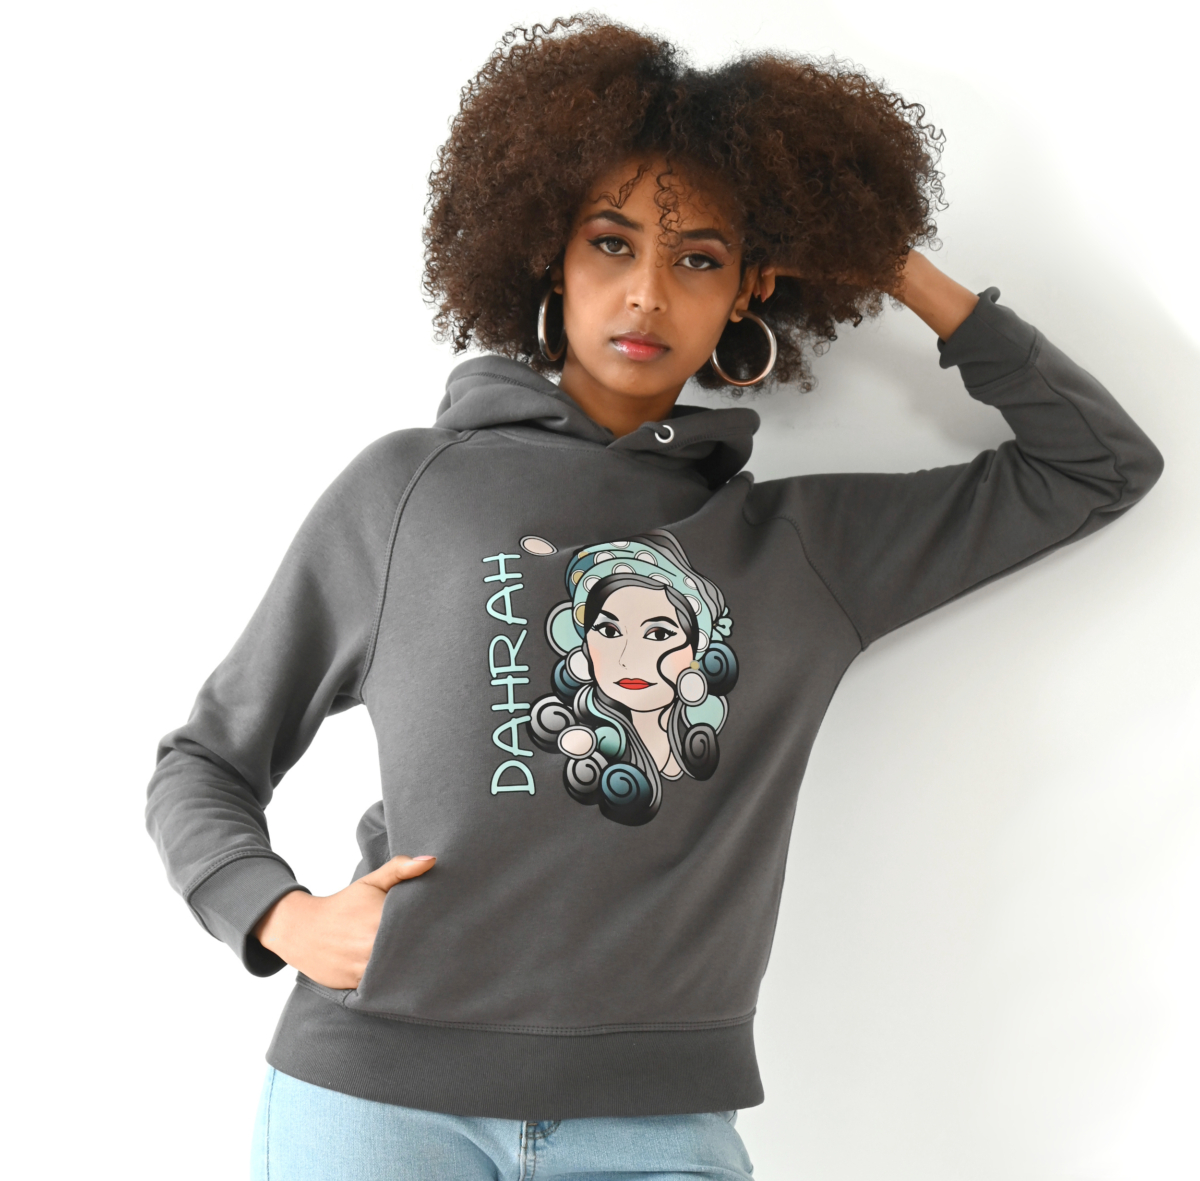 Beautiful high quality organic hoodie with print of a girl with black curls designed by Dahrah Darah Fashion.